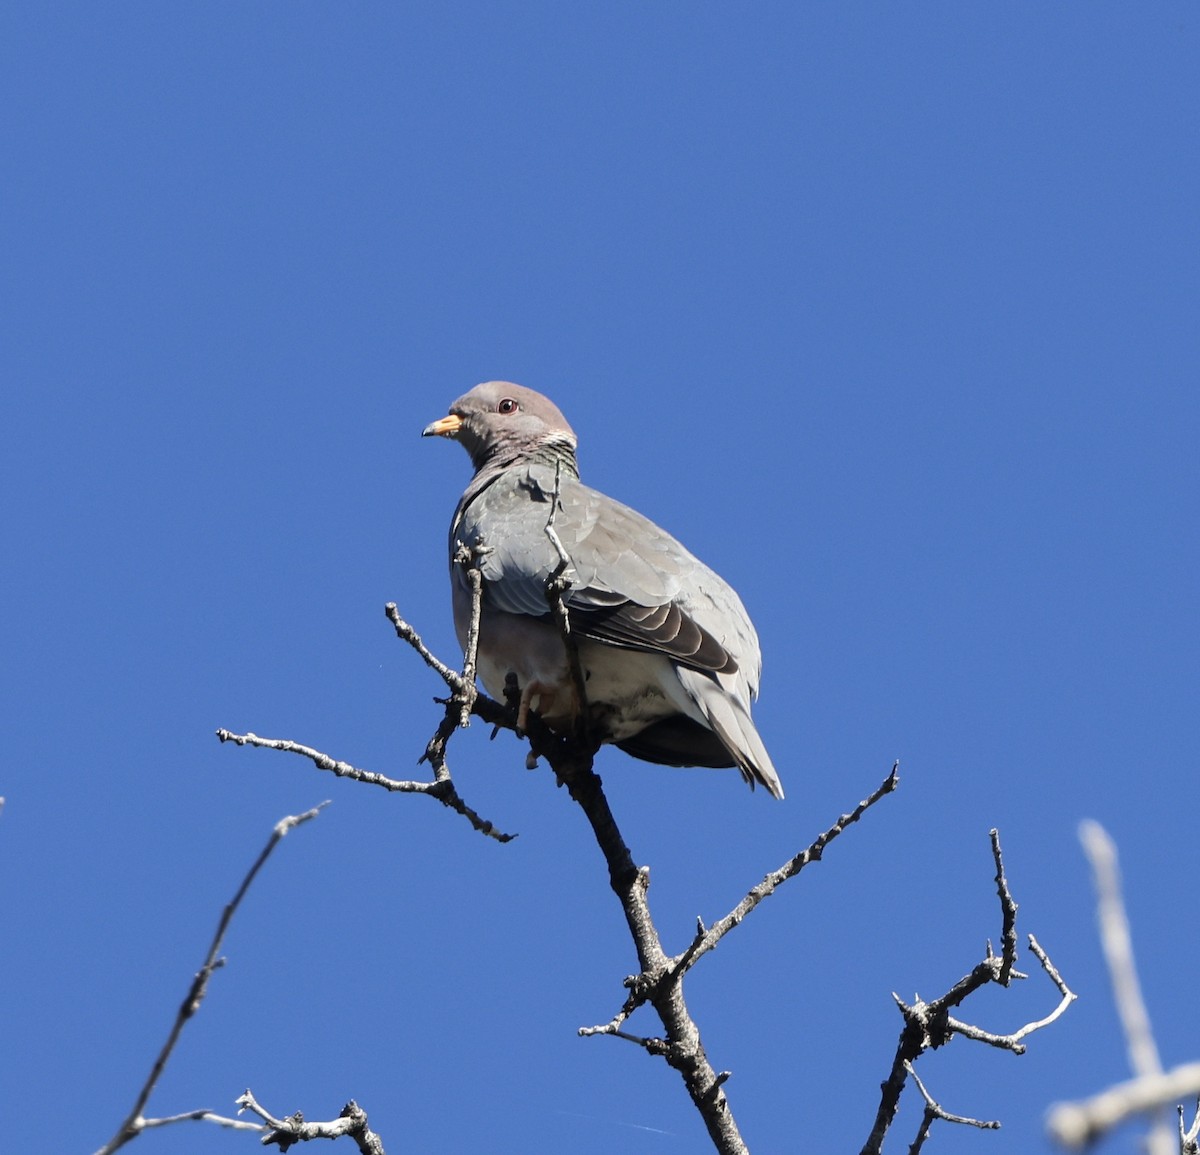 Band-tailed Pigeon - Carolyn Thiele